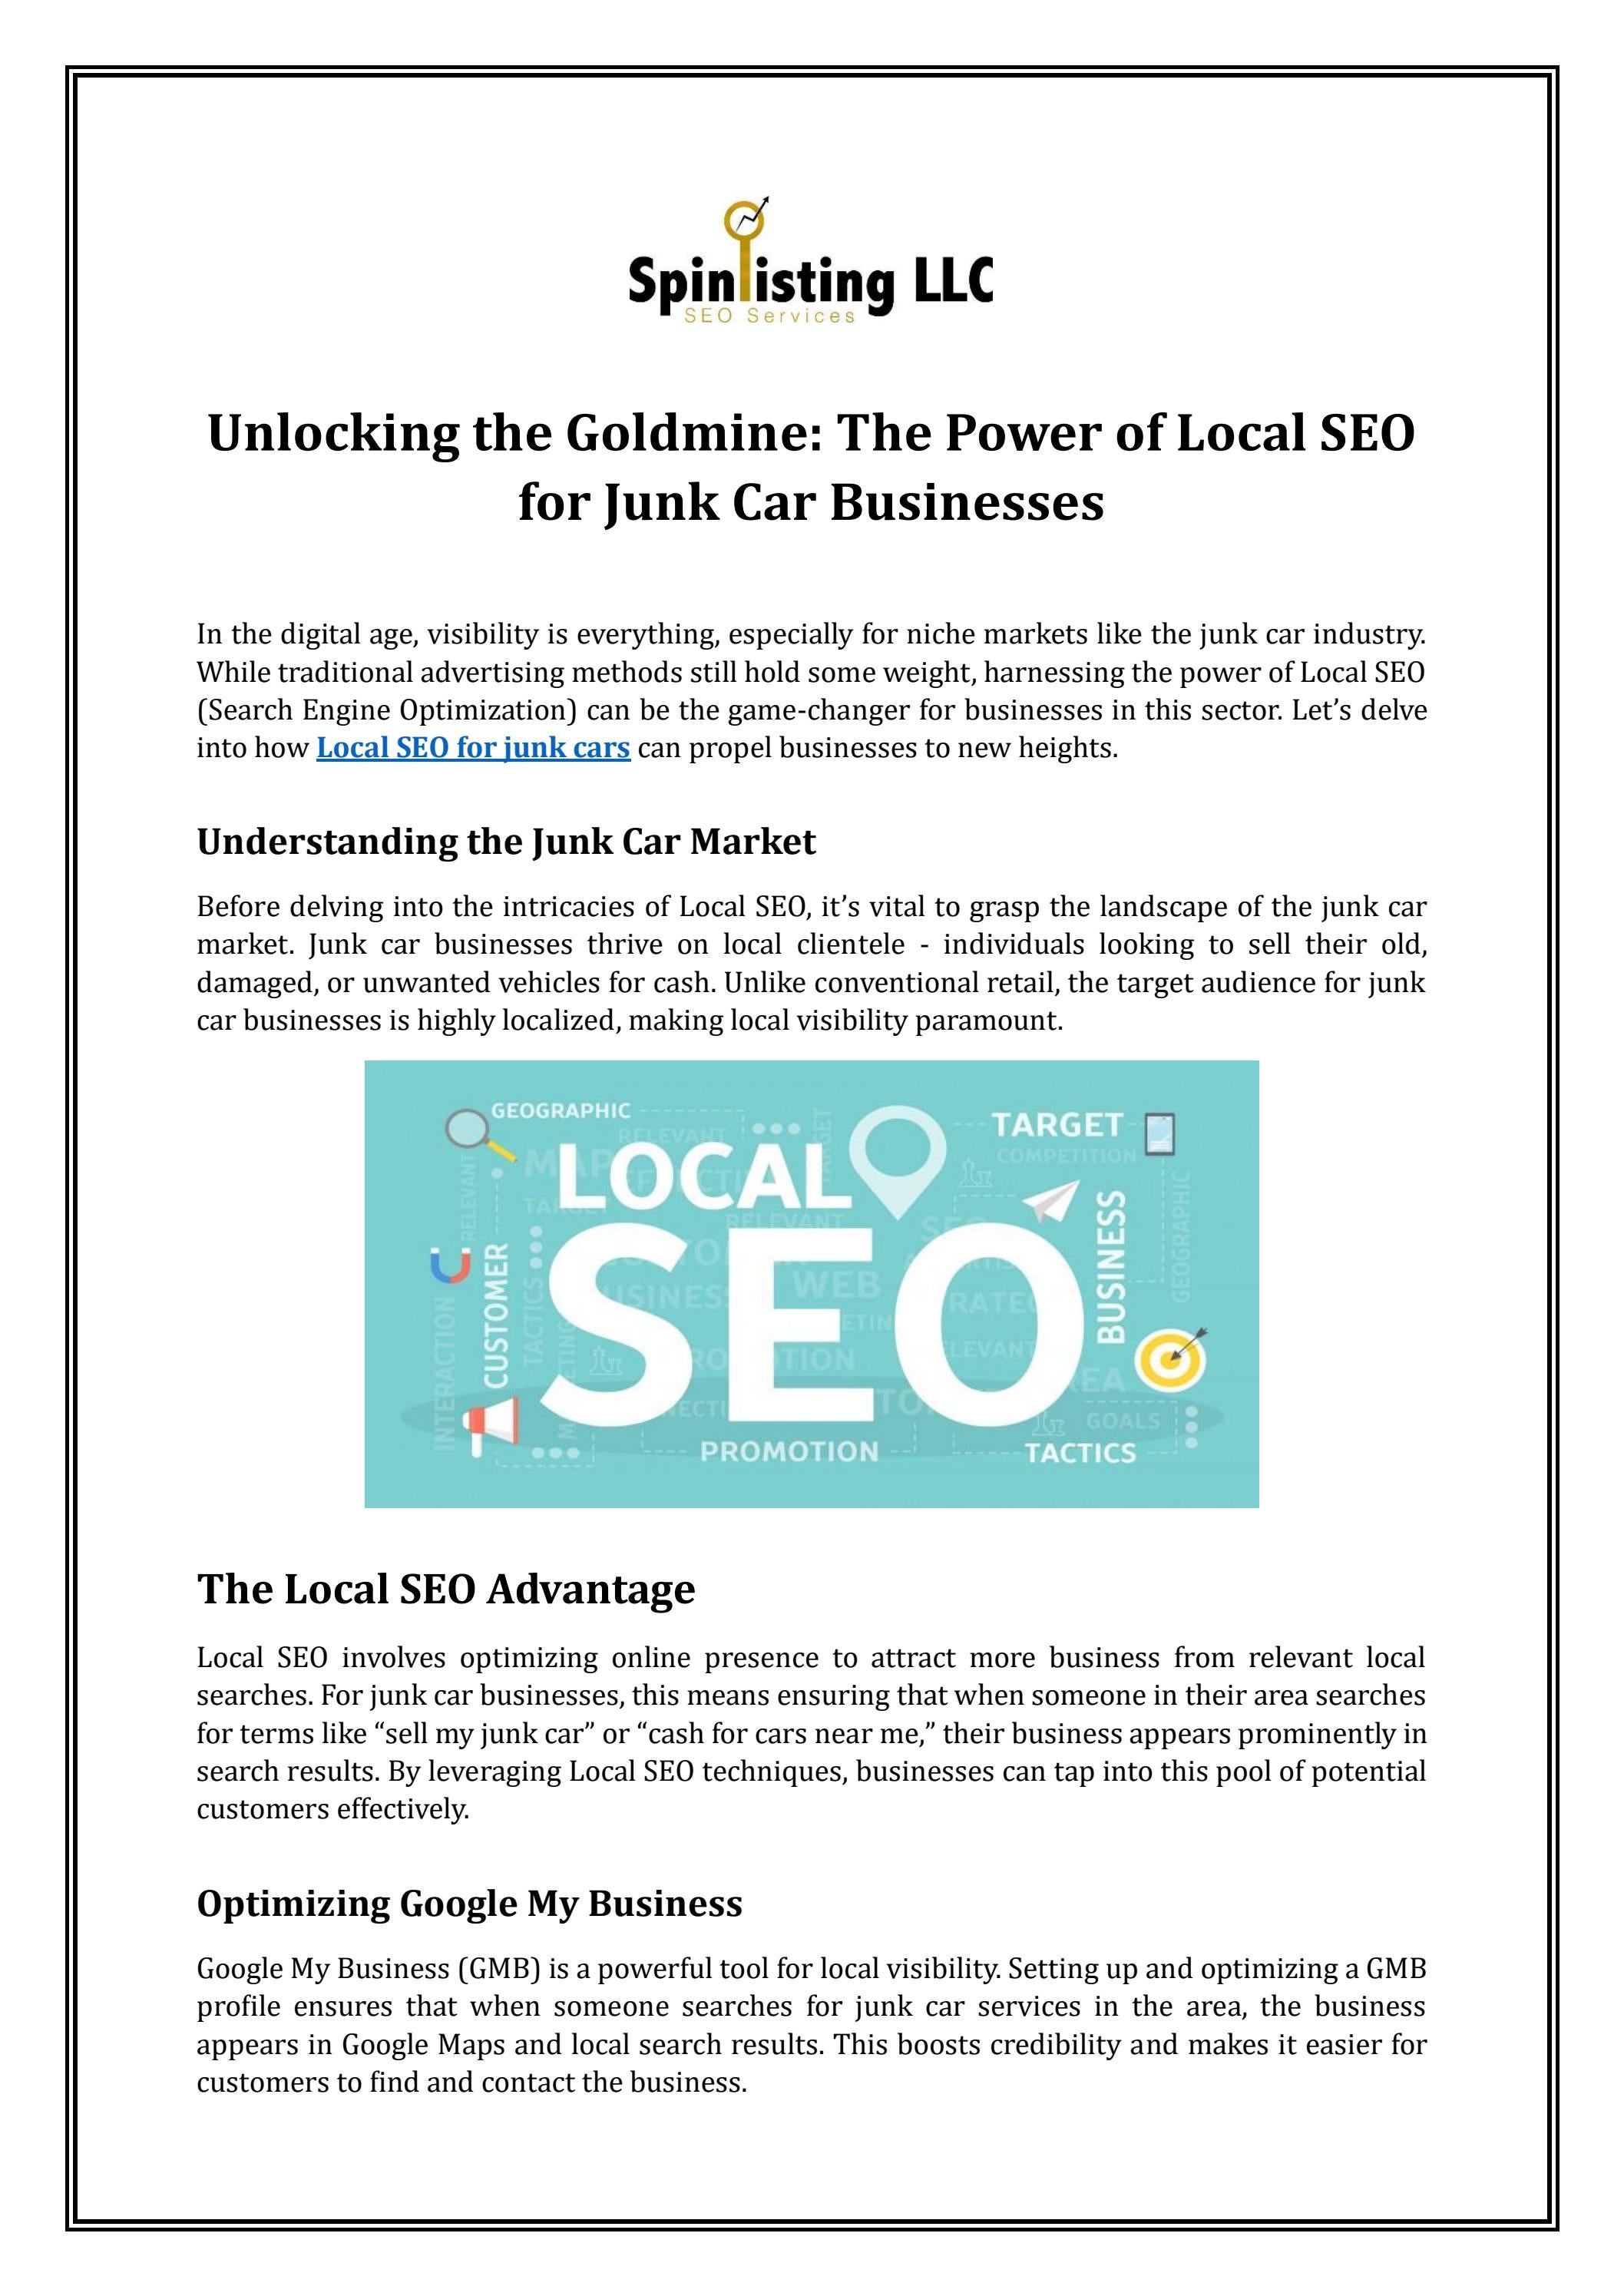 Unlocking the Goldmine: The Power of Local SEO for Junk Car Businesses